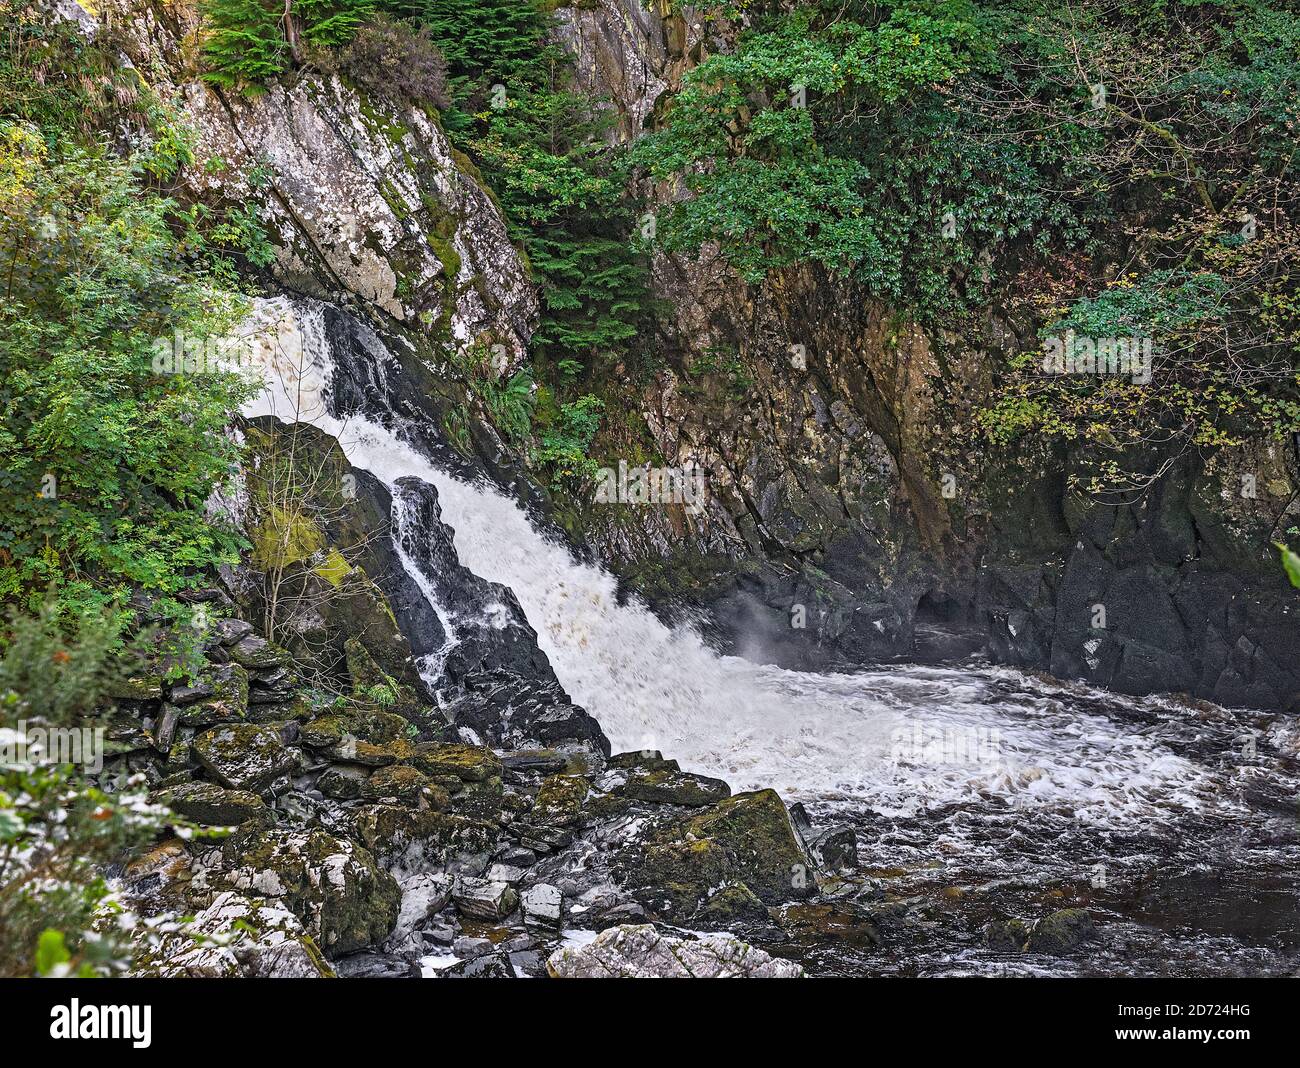 Conwy Falls on the River (Afon) Conwy near Betws-y-Coed North Wales UK October 2019 1652 Stock Photo